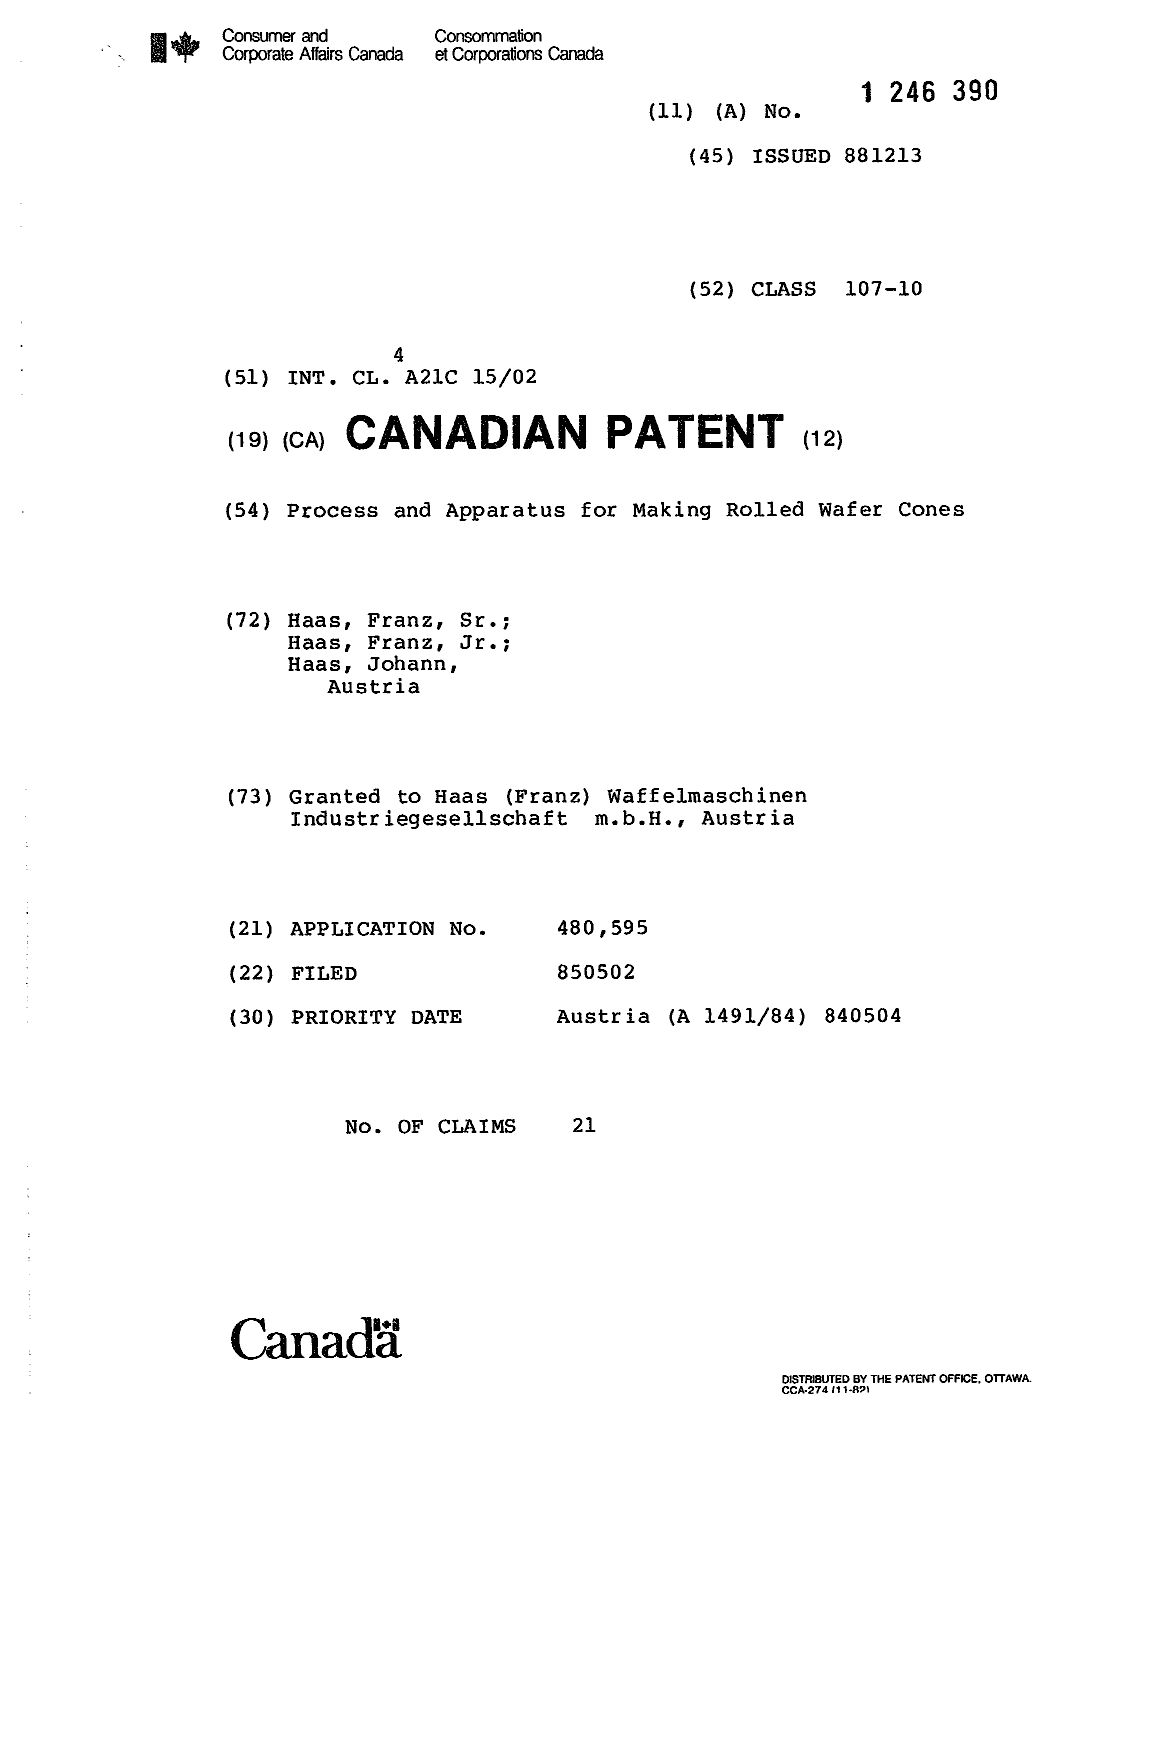 Canadian Patent Document 1246390. Cover Page 19931003. Image 1 of 1